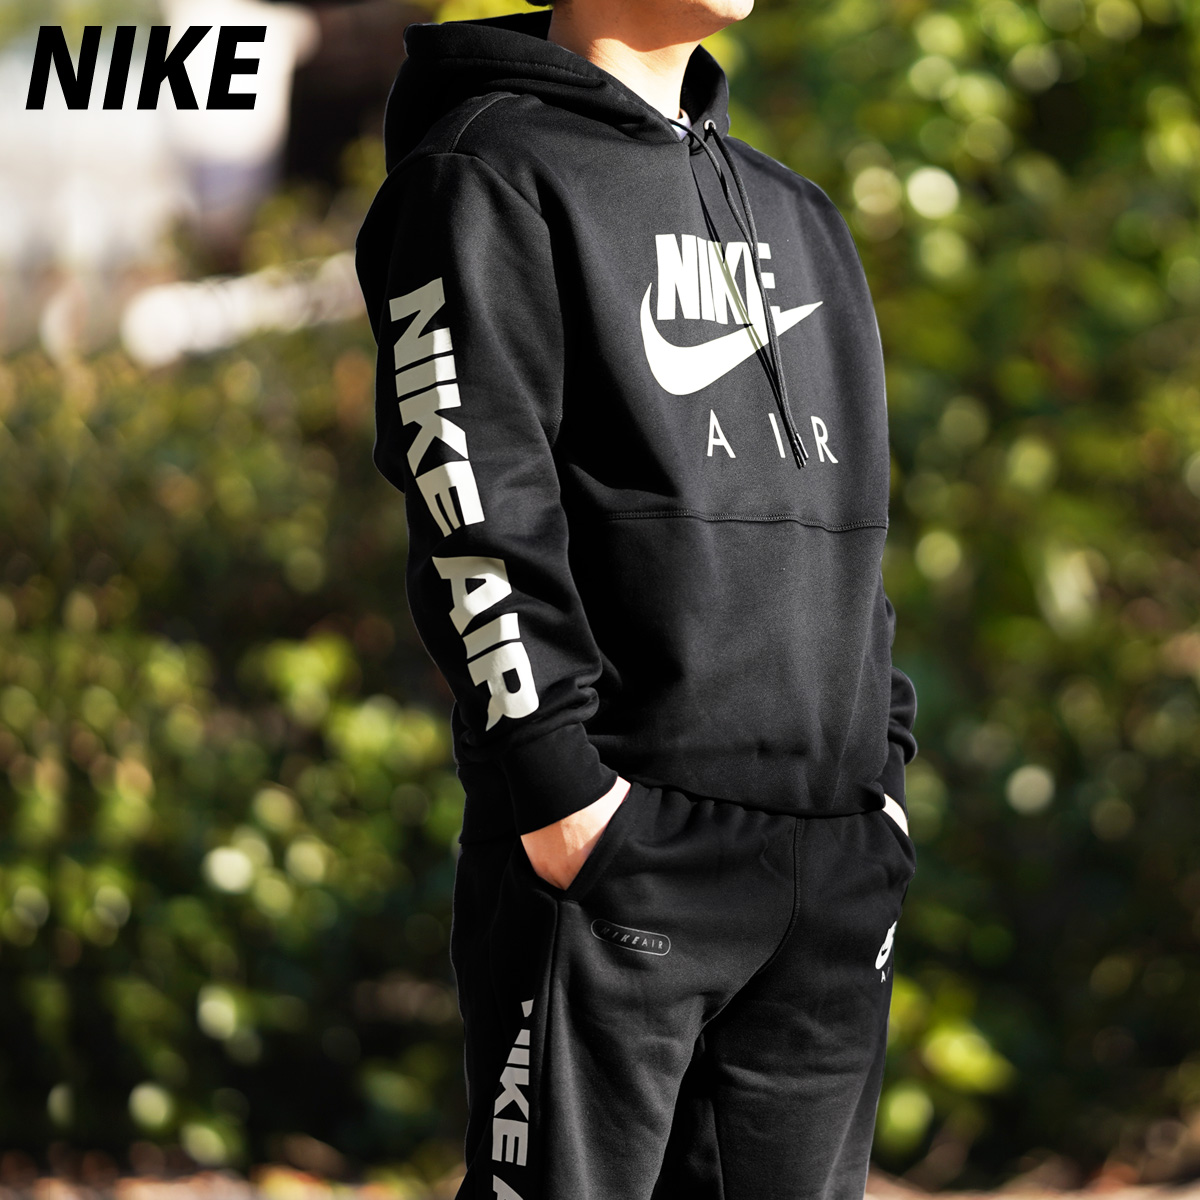 FCRB×NIKE スウェット セットアップ-